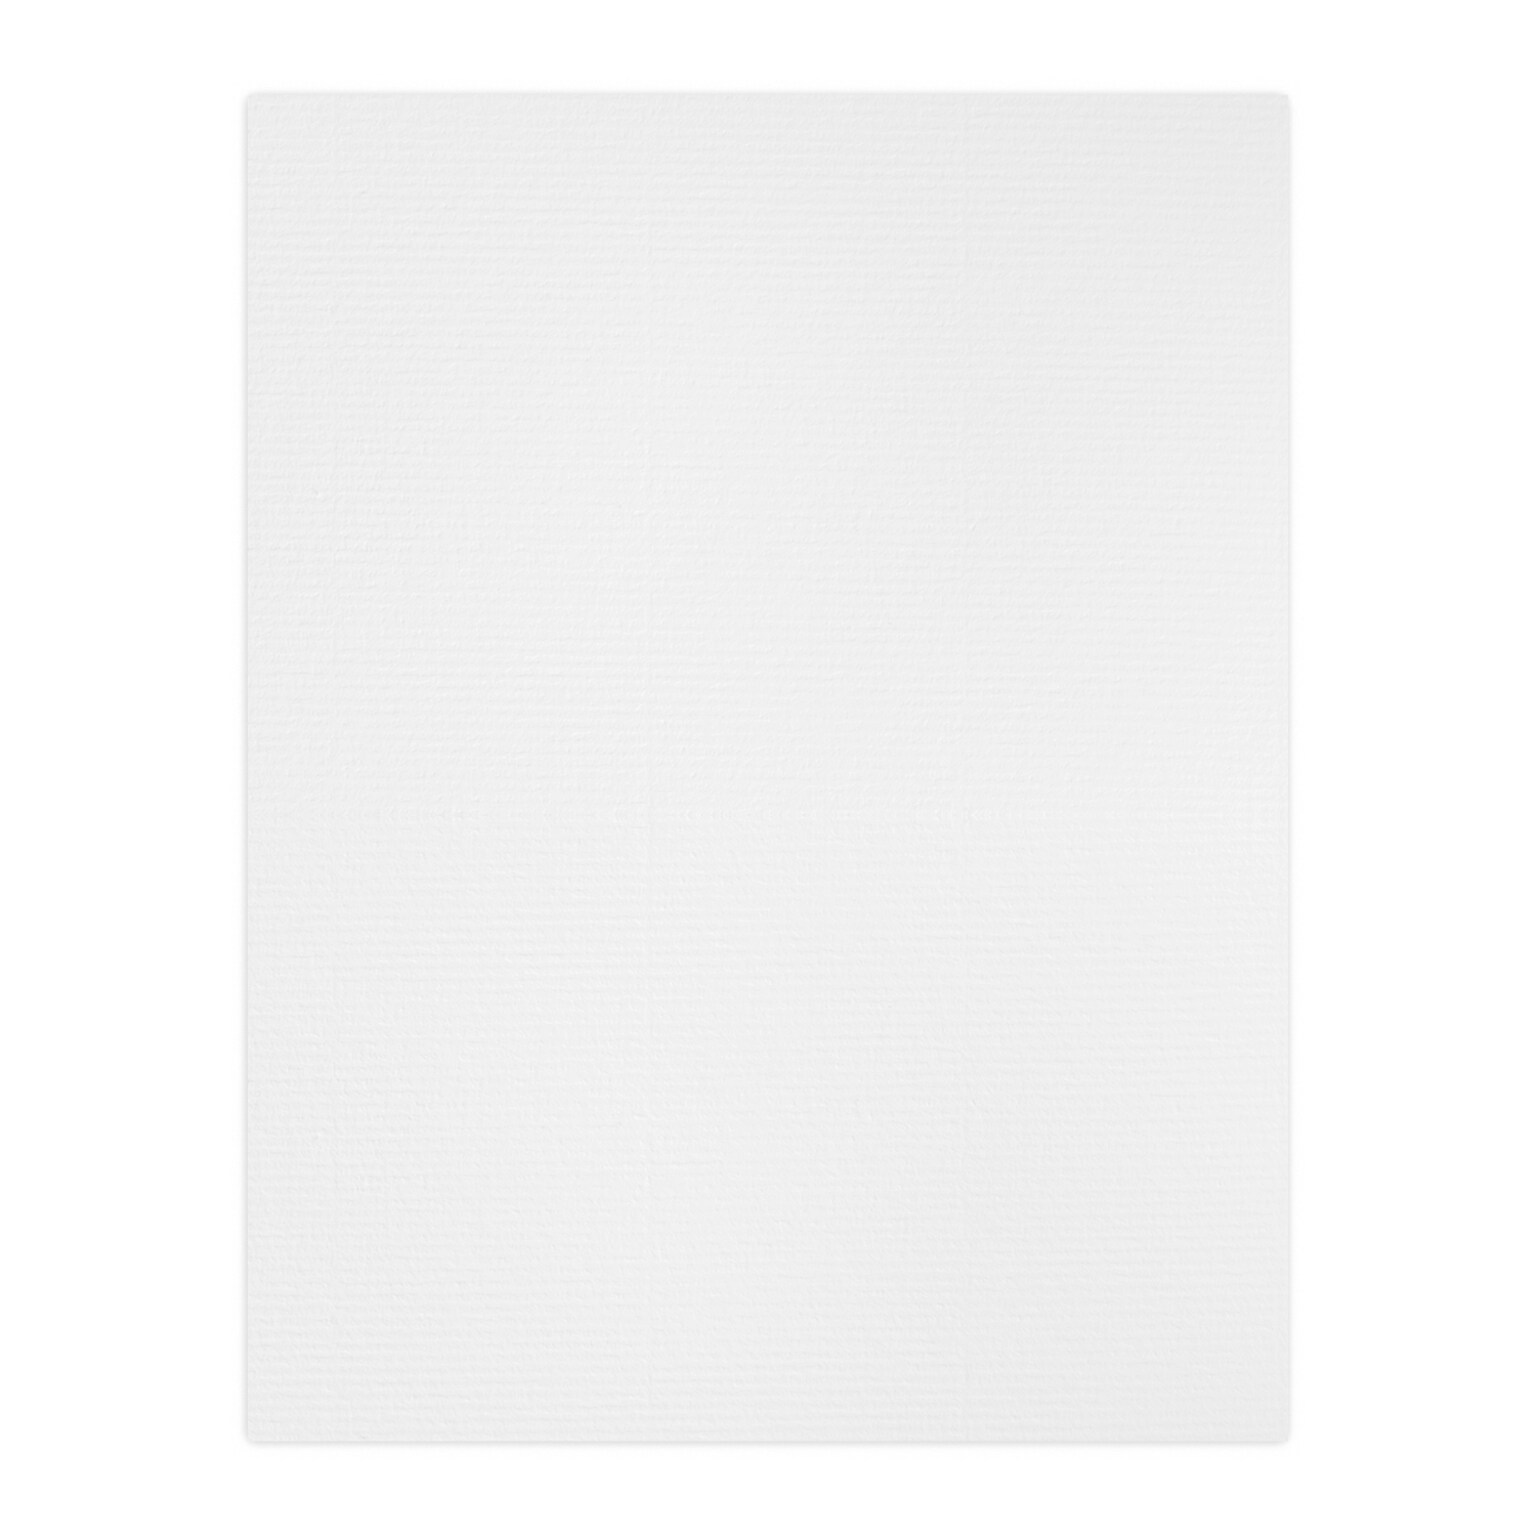 Blank 2nd Sheet Letterhead, 8.5 x 11, CLASSIC® Laid Antique Gray 24# Stock